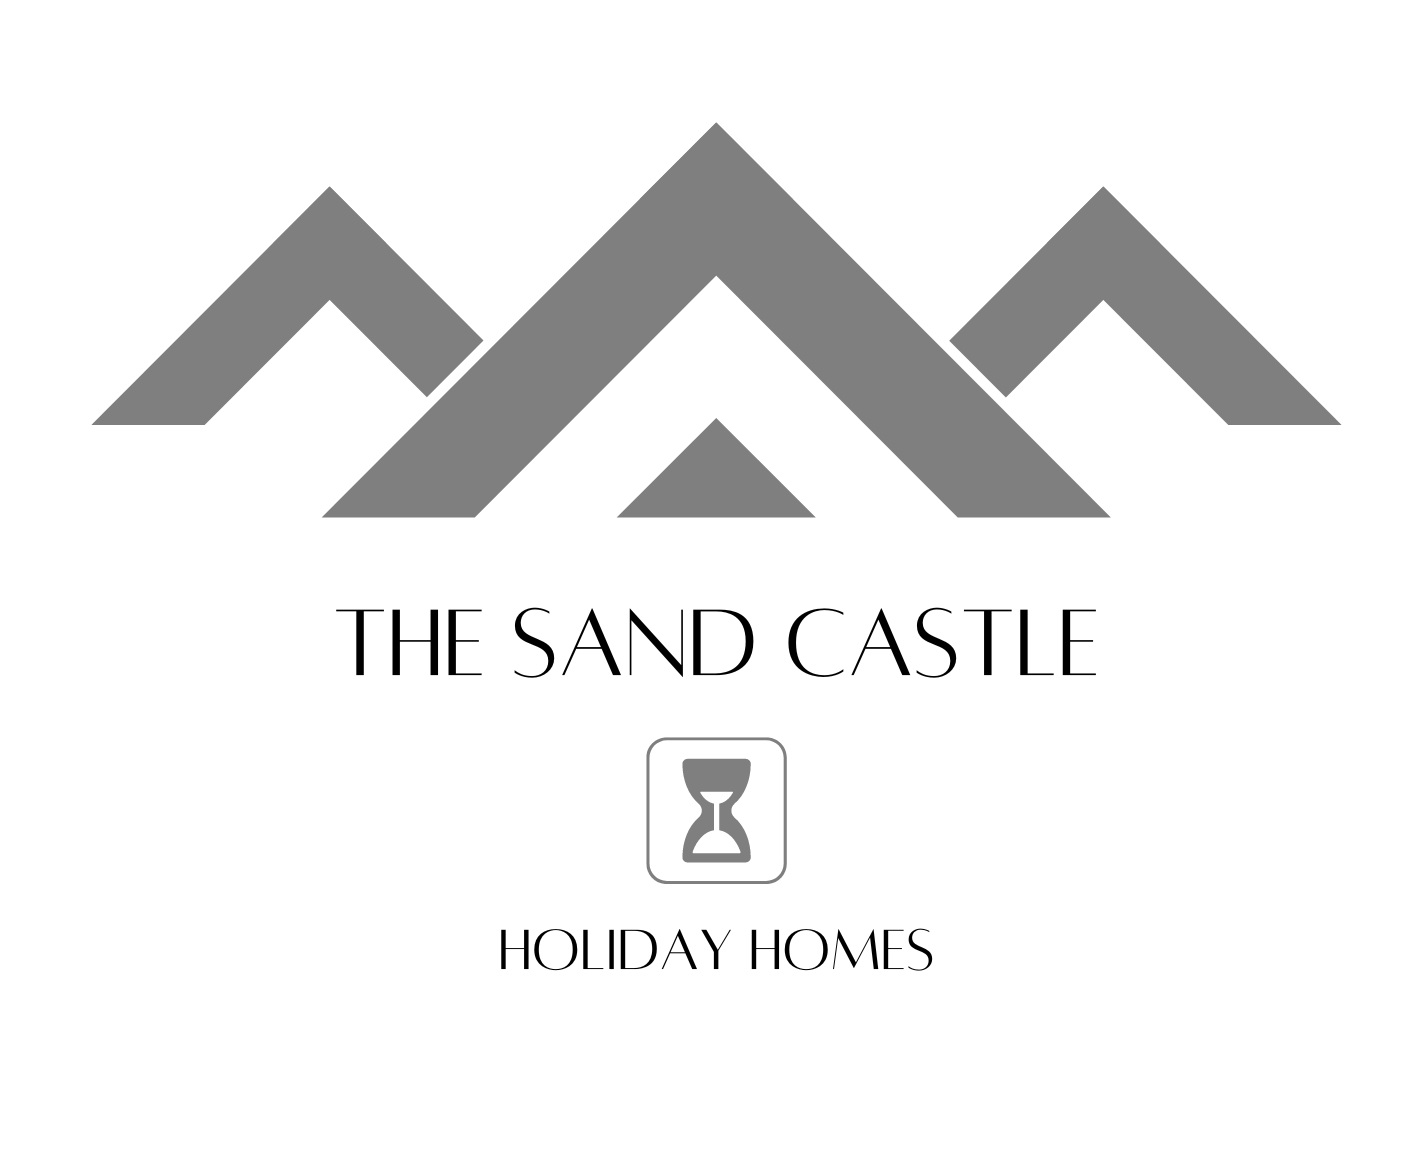 The Sand Castle Holiday Homes